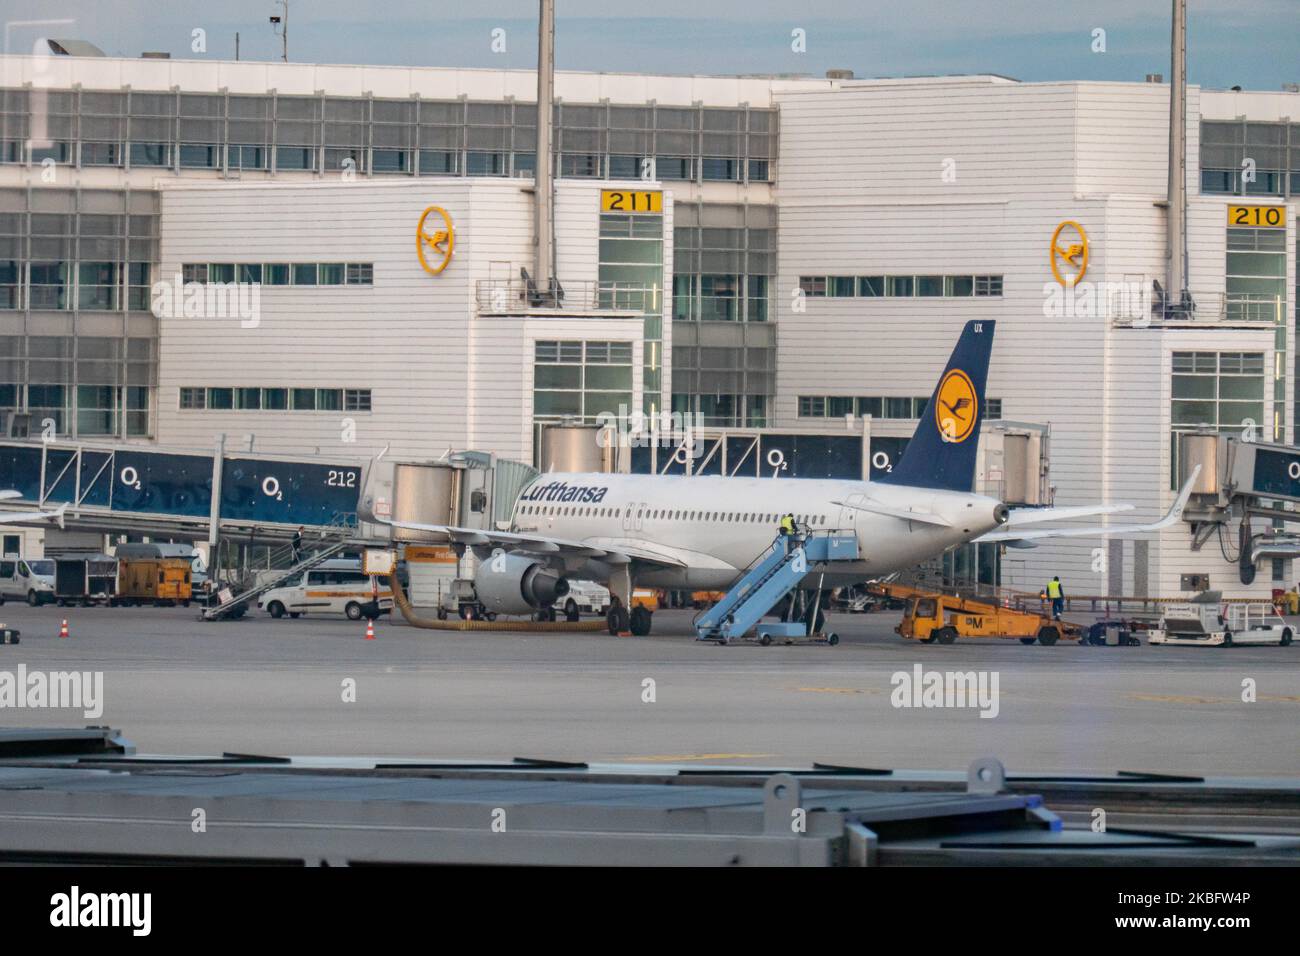 An Airbus A320 of Lufthansa as seen docked on gate 212 in Munich Airport. Early morning airplane traffic movement of Lufthansa aircraft with their logo visible on the tarmac and docked via jetbridge or air bridge at the terminal at Munich MUC EDDM international airport in Bavaria, Germany, Flughafen München in German. Deutsche Lufthansa DLH LH is the flag carrier and largest airline in Germany using Munich as one of their two hubs. Lufthansa is a Star Alliance aviation alliance member. January 26, 2020 (Photo by Nicolas Economou/NurPhoto) Stock Photo